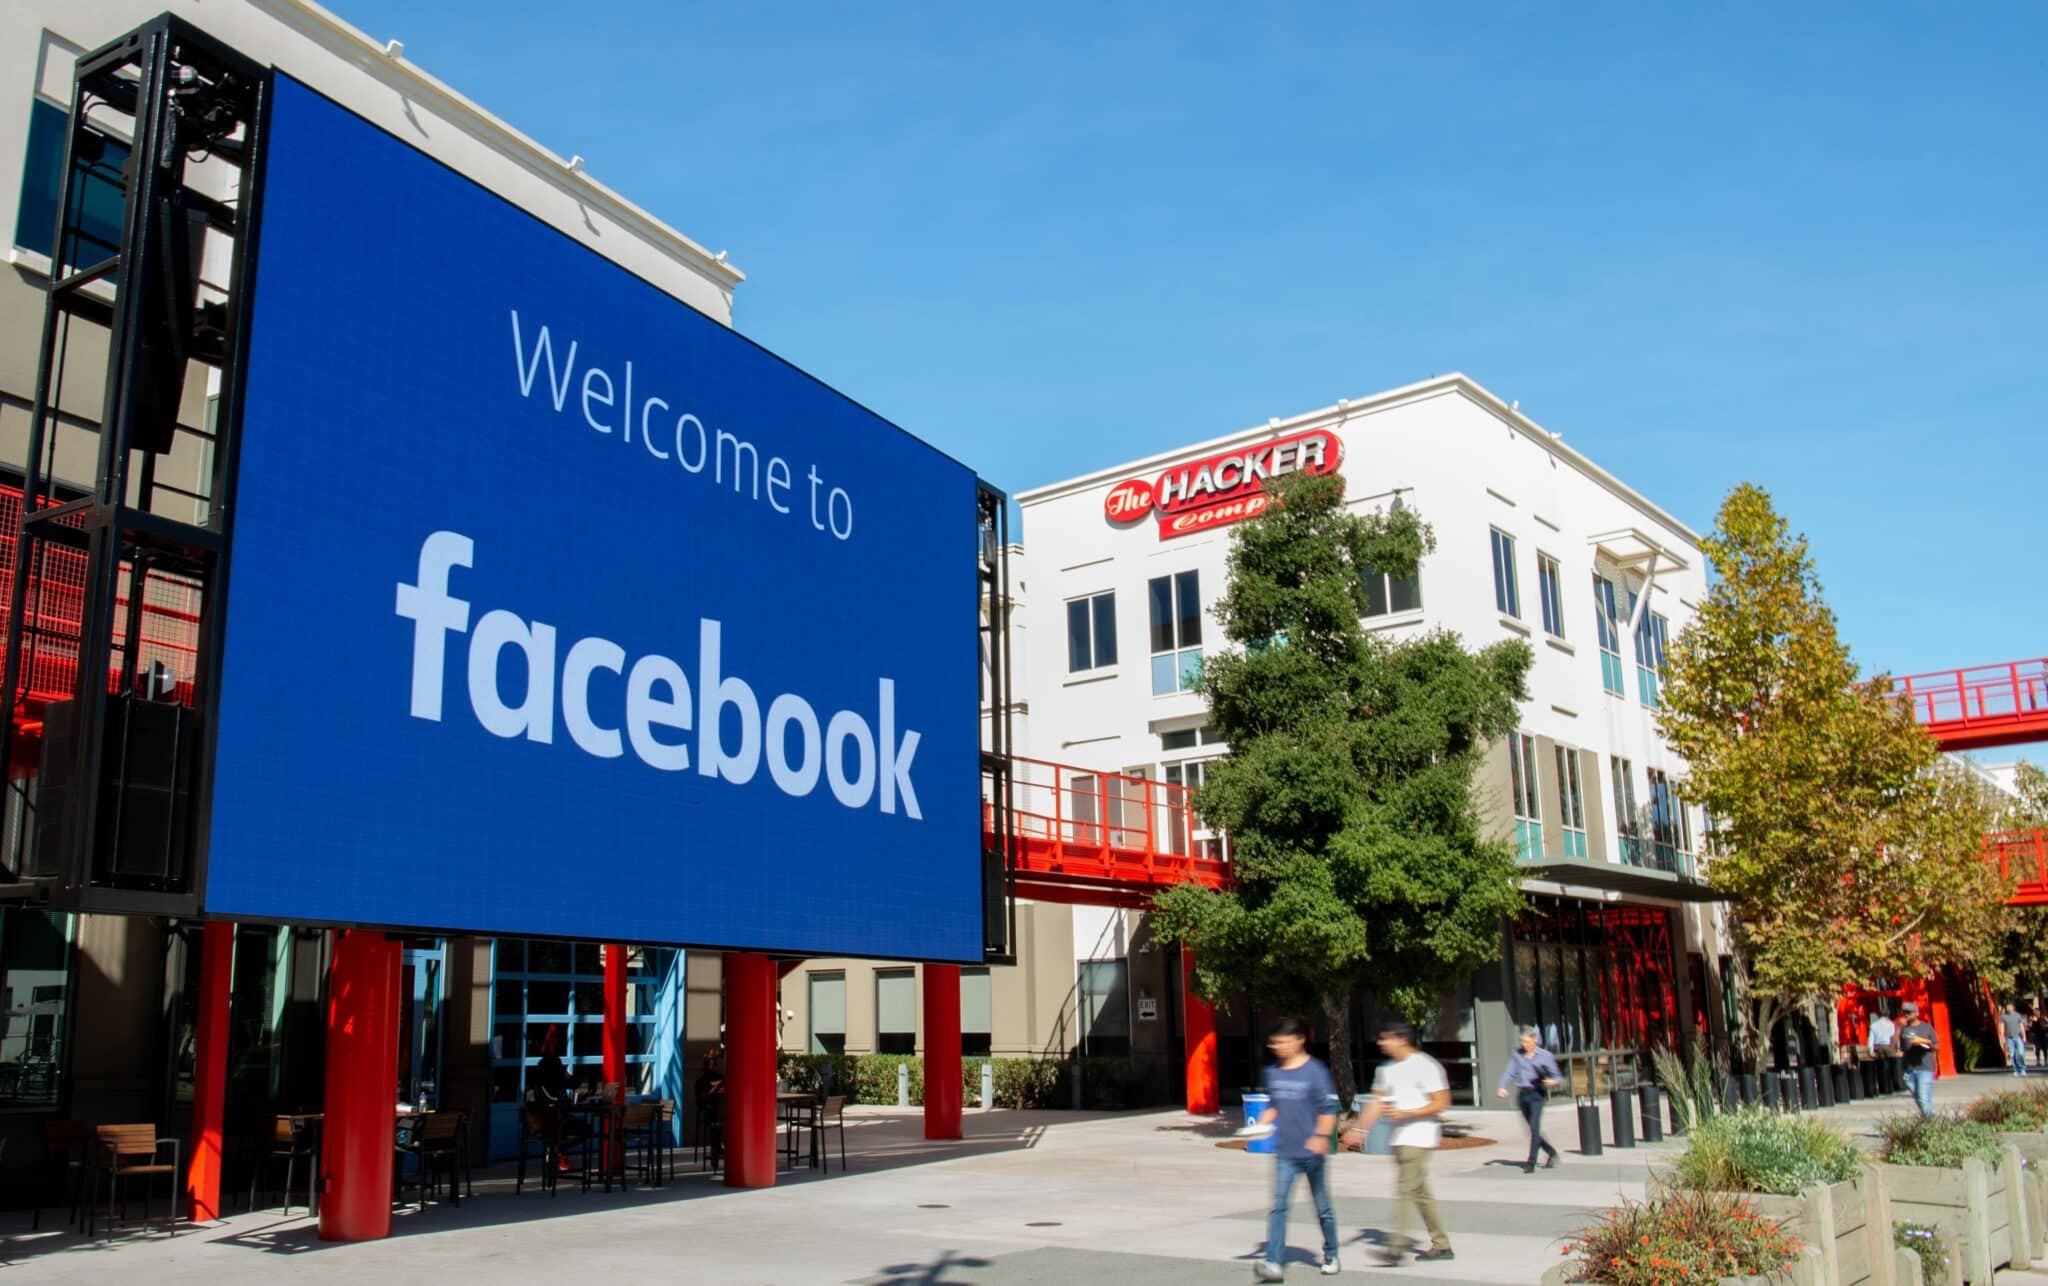 A giant digital sign is seen at Facebook's corporate headquarters campus in Menlo Park, California, on October 23, 2019. (Photo by Josh Edelson / AFP) (Photo by JOSH EDELSON/AFP via Getty Images)